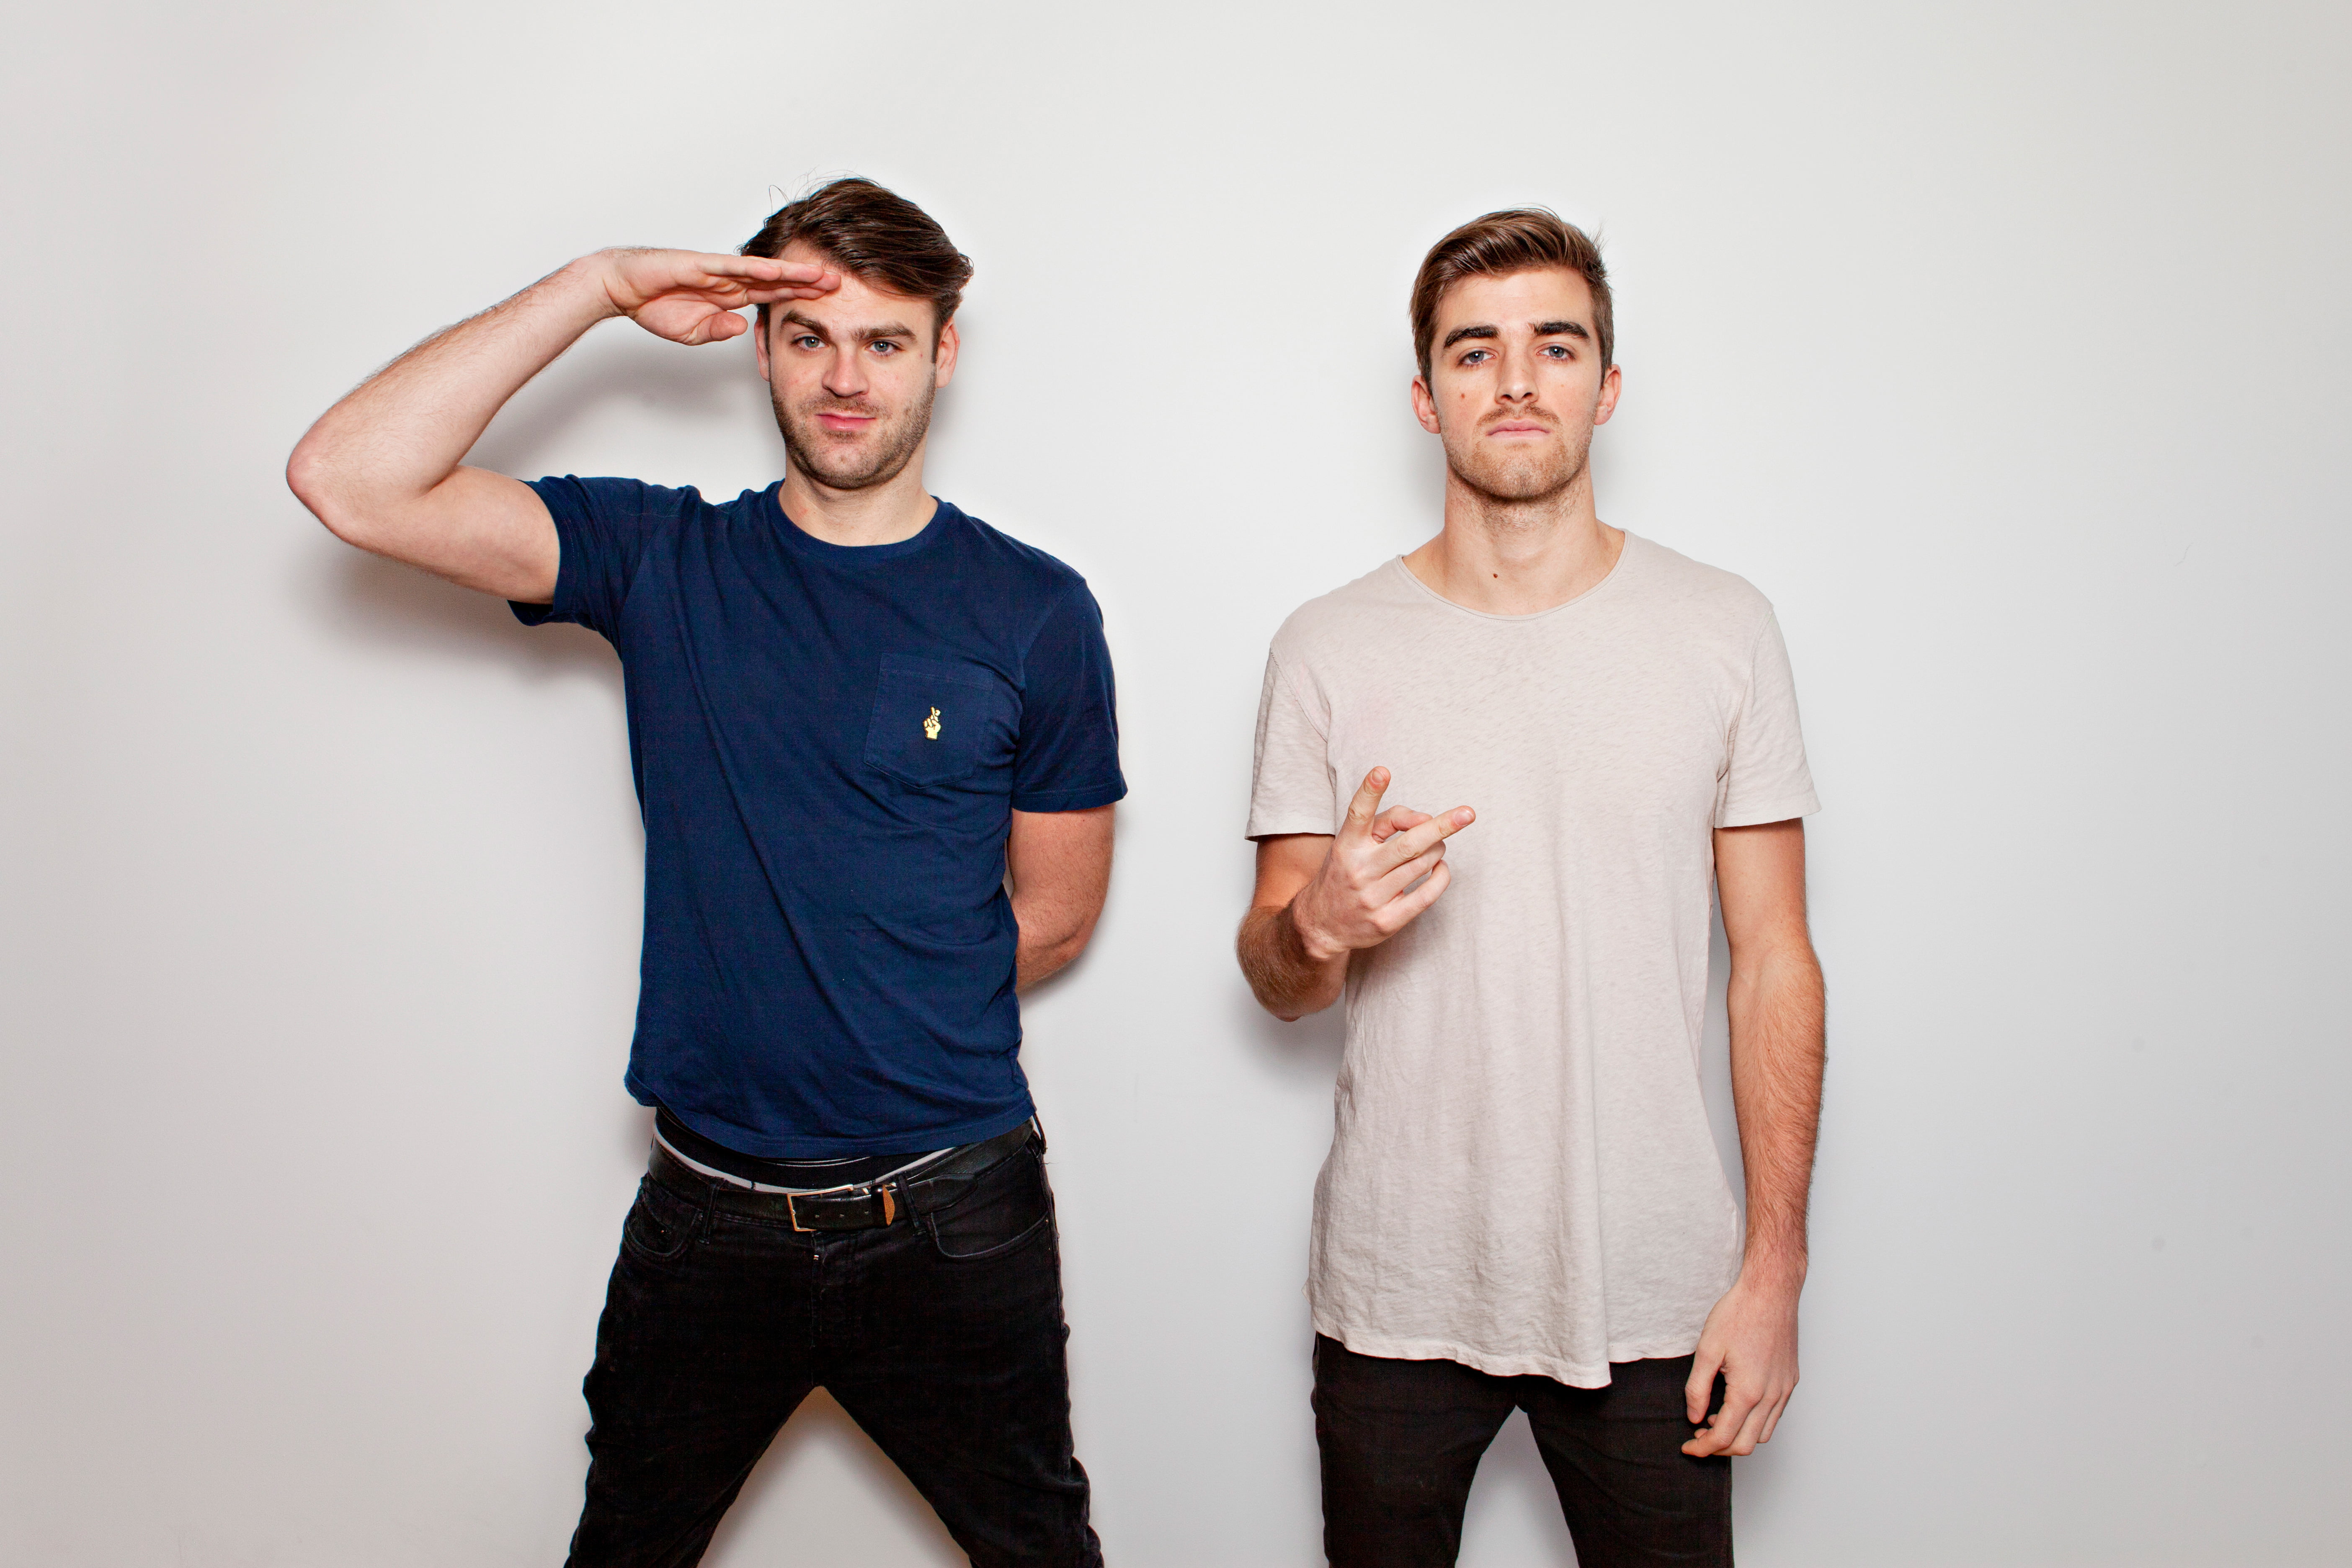 chainsmokers, music, andrew taggart, alex pall, 4k, 5k, hd